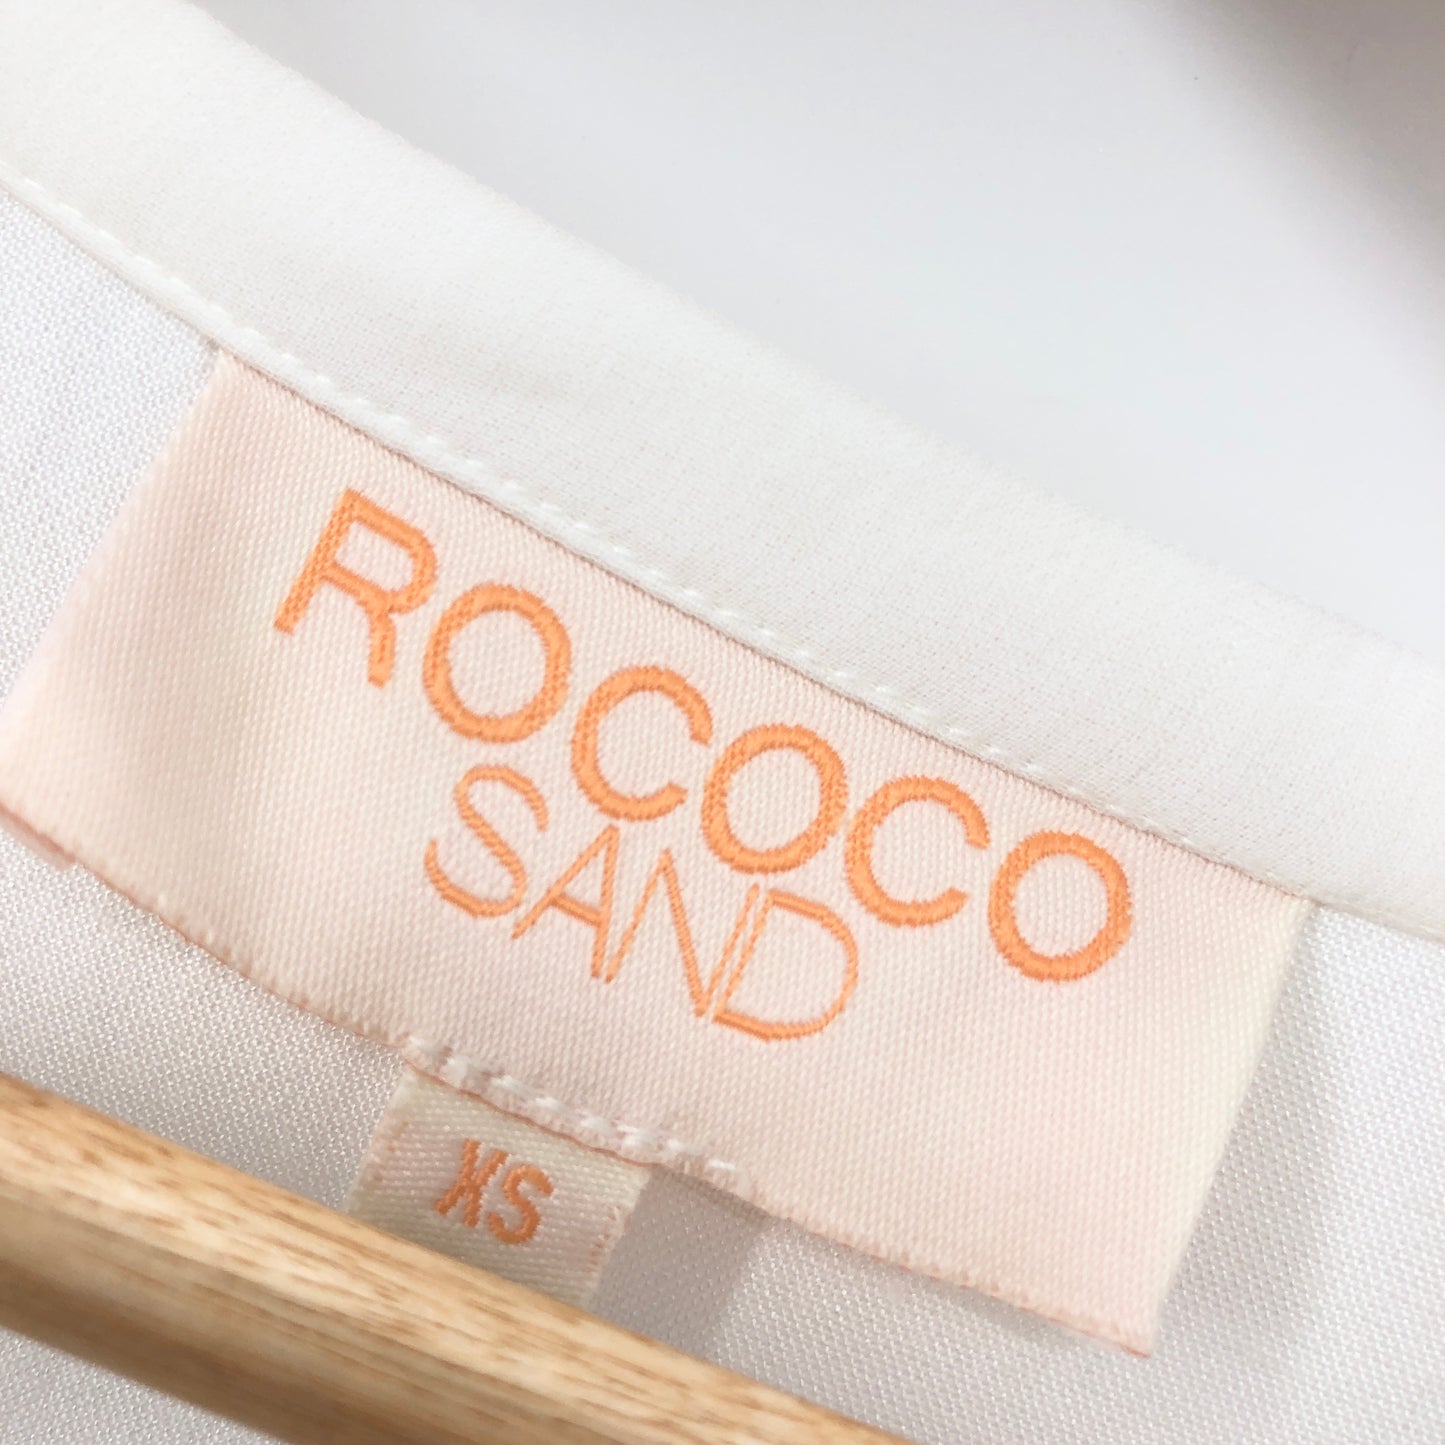 ROCOCO SAND High Low Long Dress in White